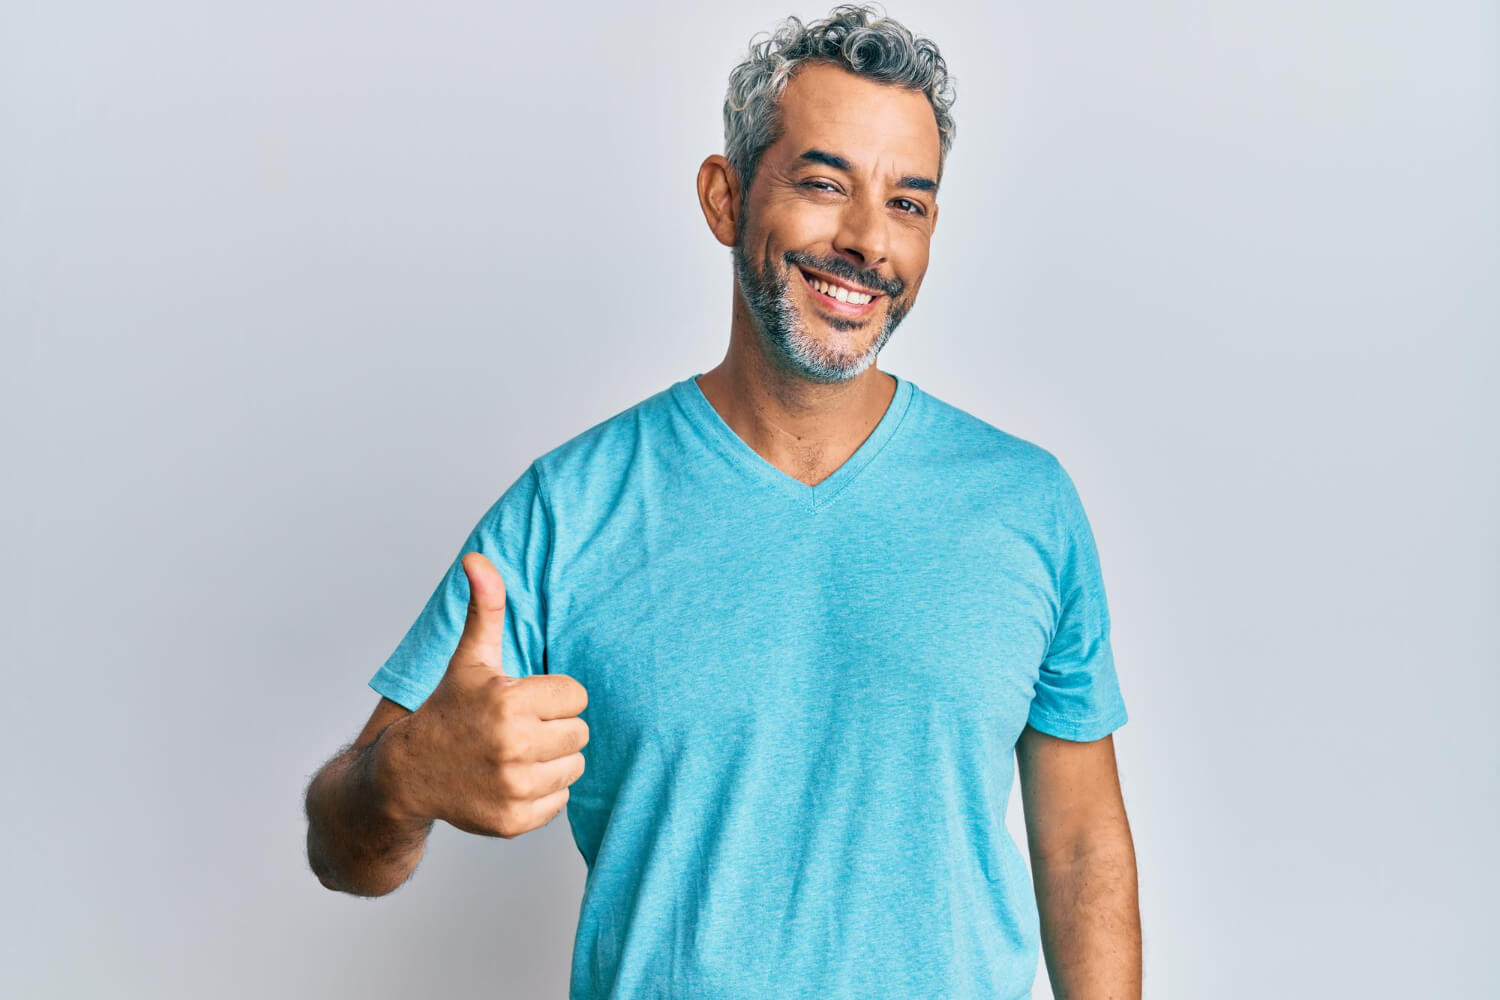 Middle age greyhaired man wearing casual clothes doing happy thumbs up gesture with hand showing if does a crown feel like a normal tooth